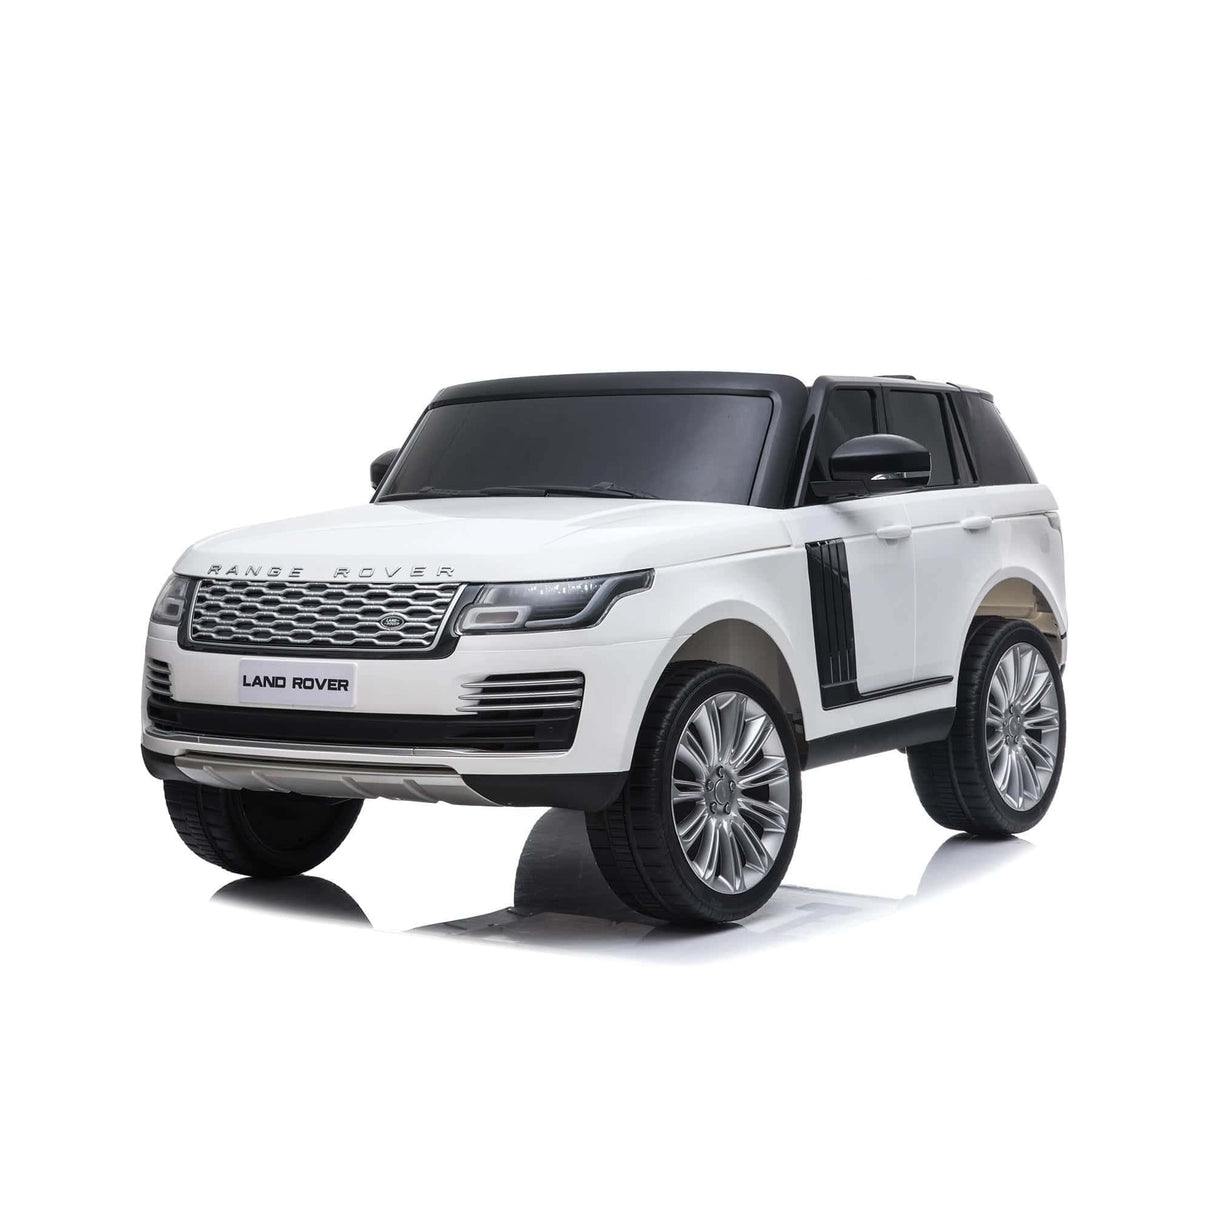 12V Range Rover HSE 2 Seater Ride on Car - DTI Direct USA